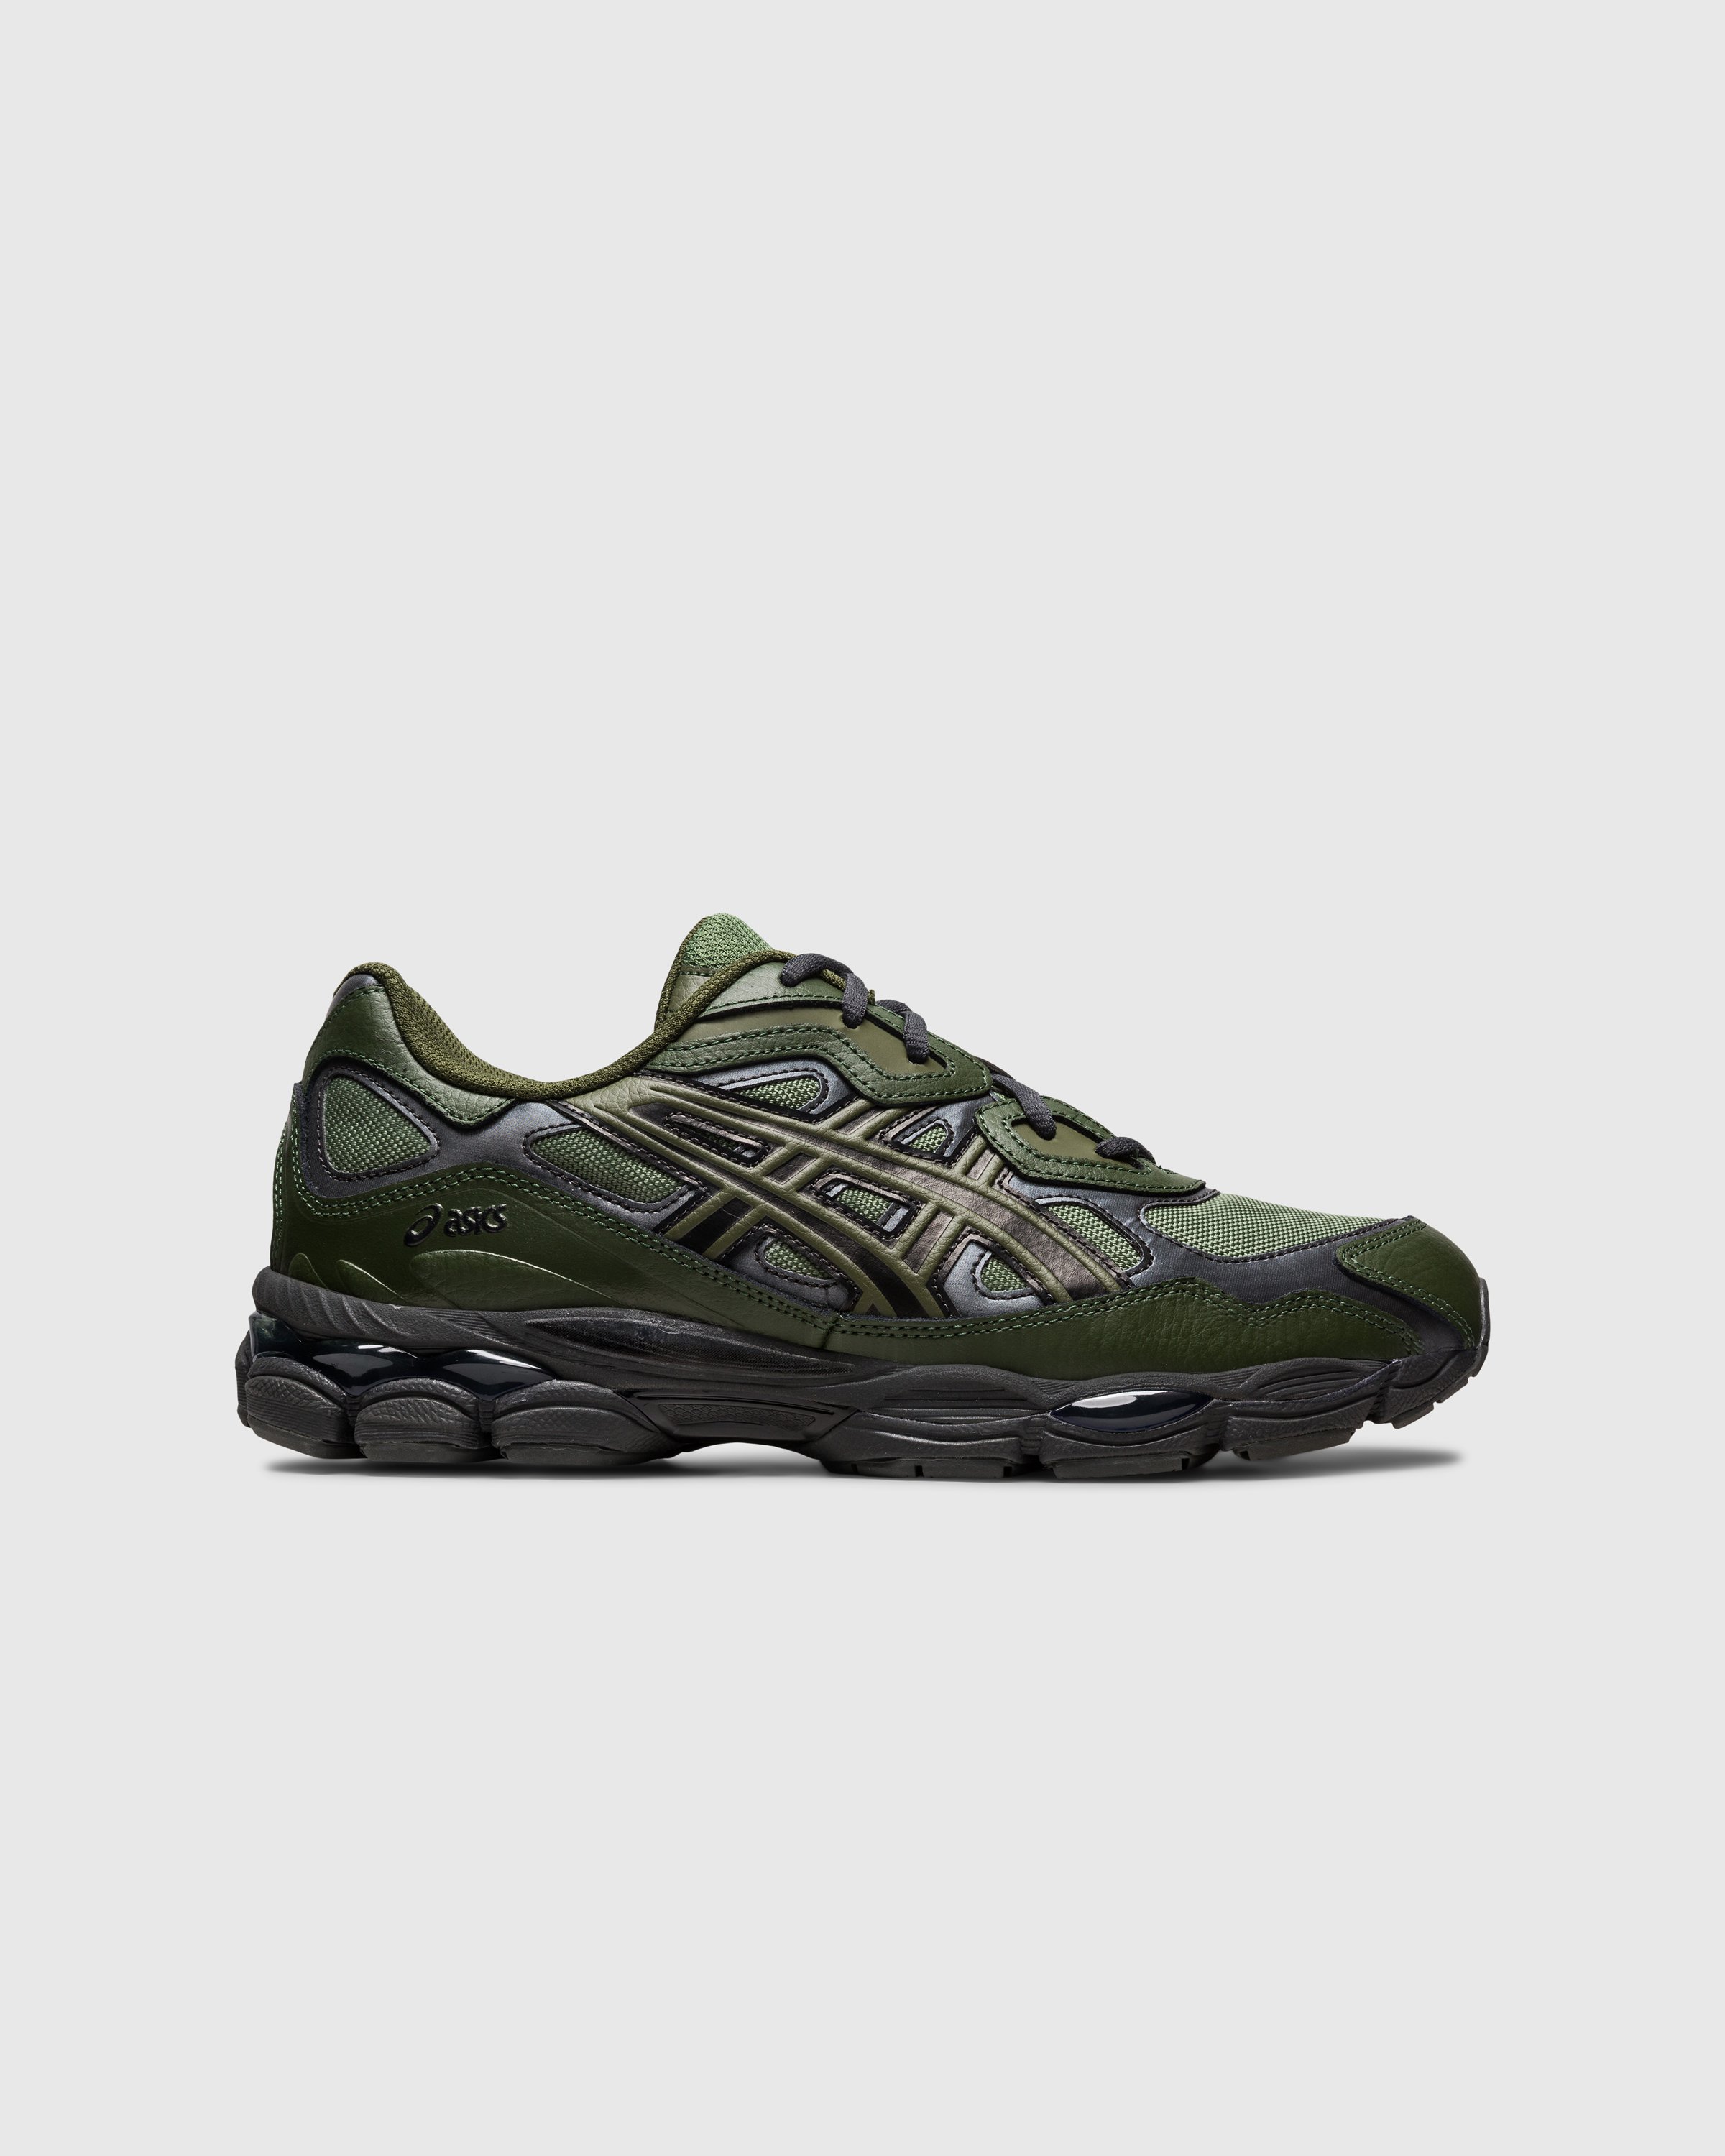 asics - GEL-NYC Moss/Forest - Footwear - Green - Image 1